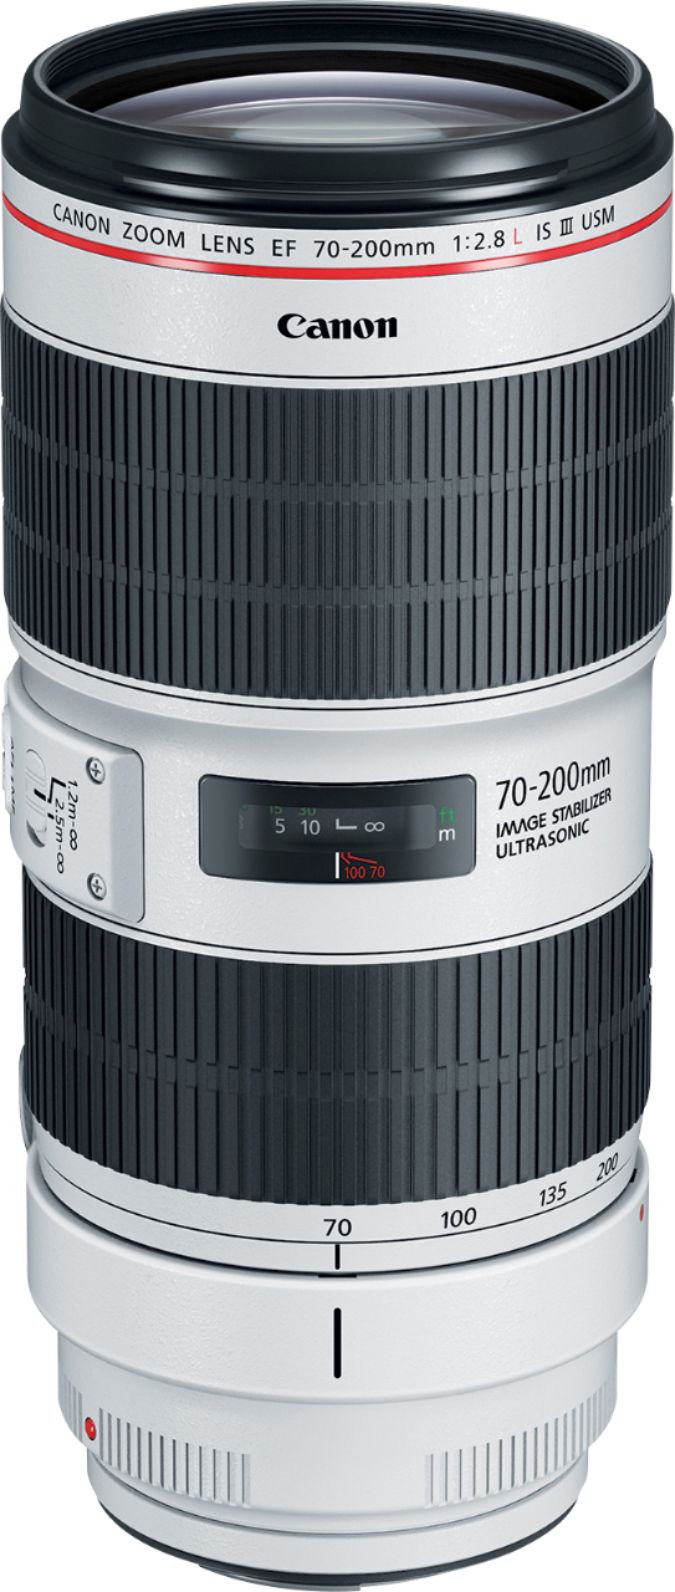 Canon EF70-200mm F2.8L IS III USM Optical Telephoto Zoom Lens for